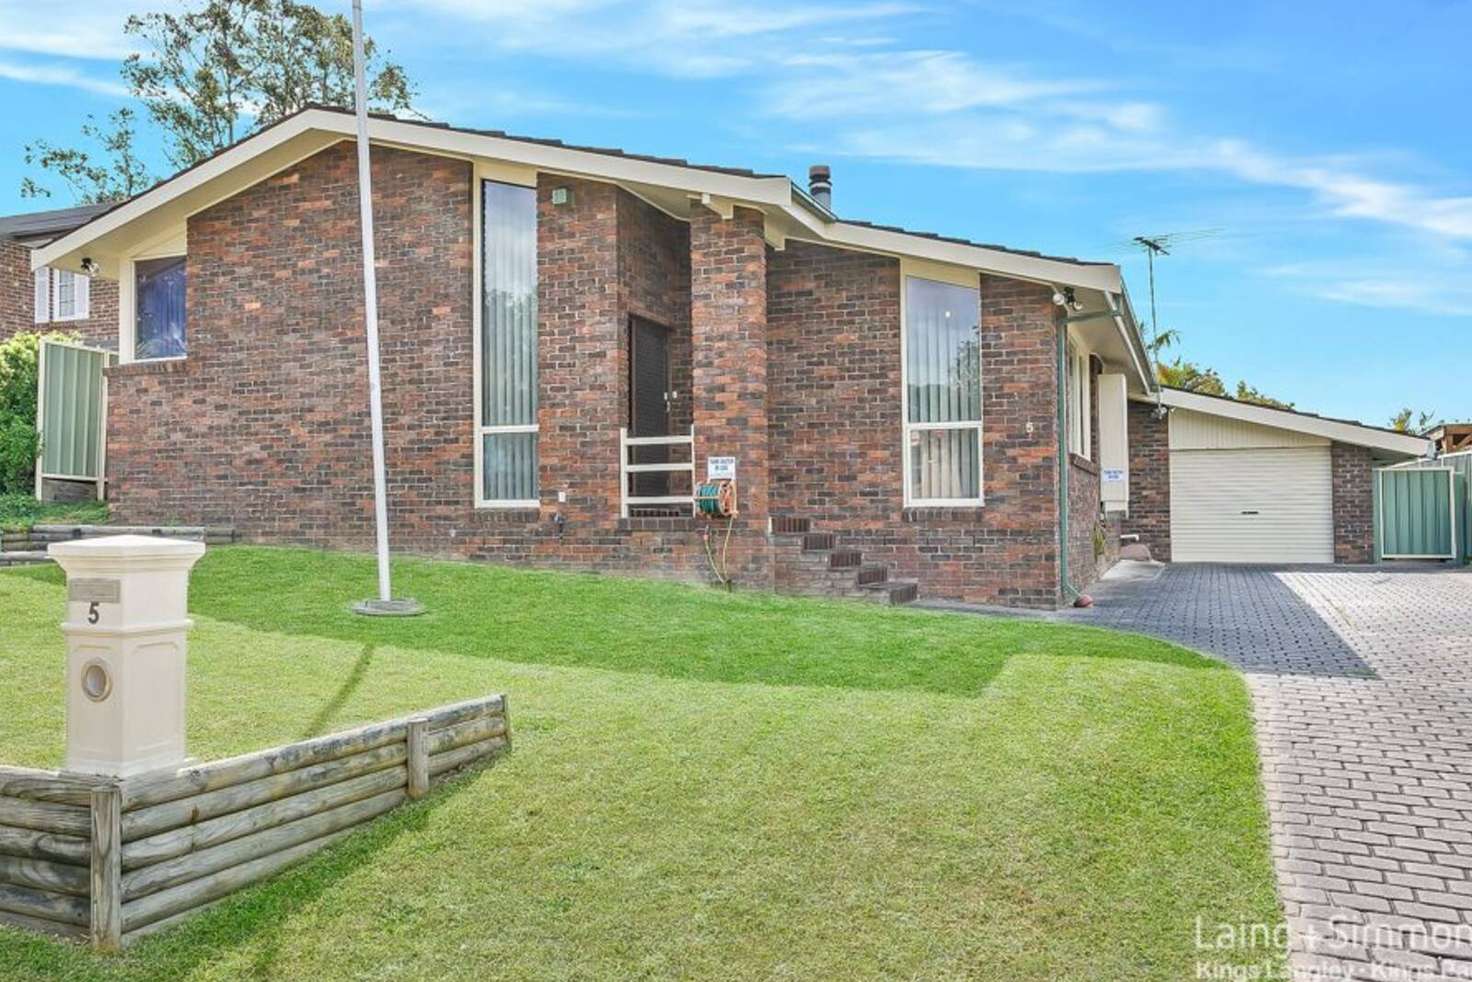 Main view of Homely house listing, 5 Rickman st, Kings Langley NSW 2147